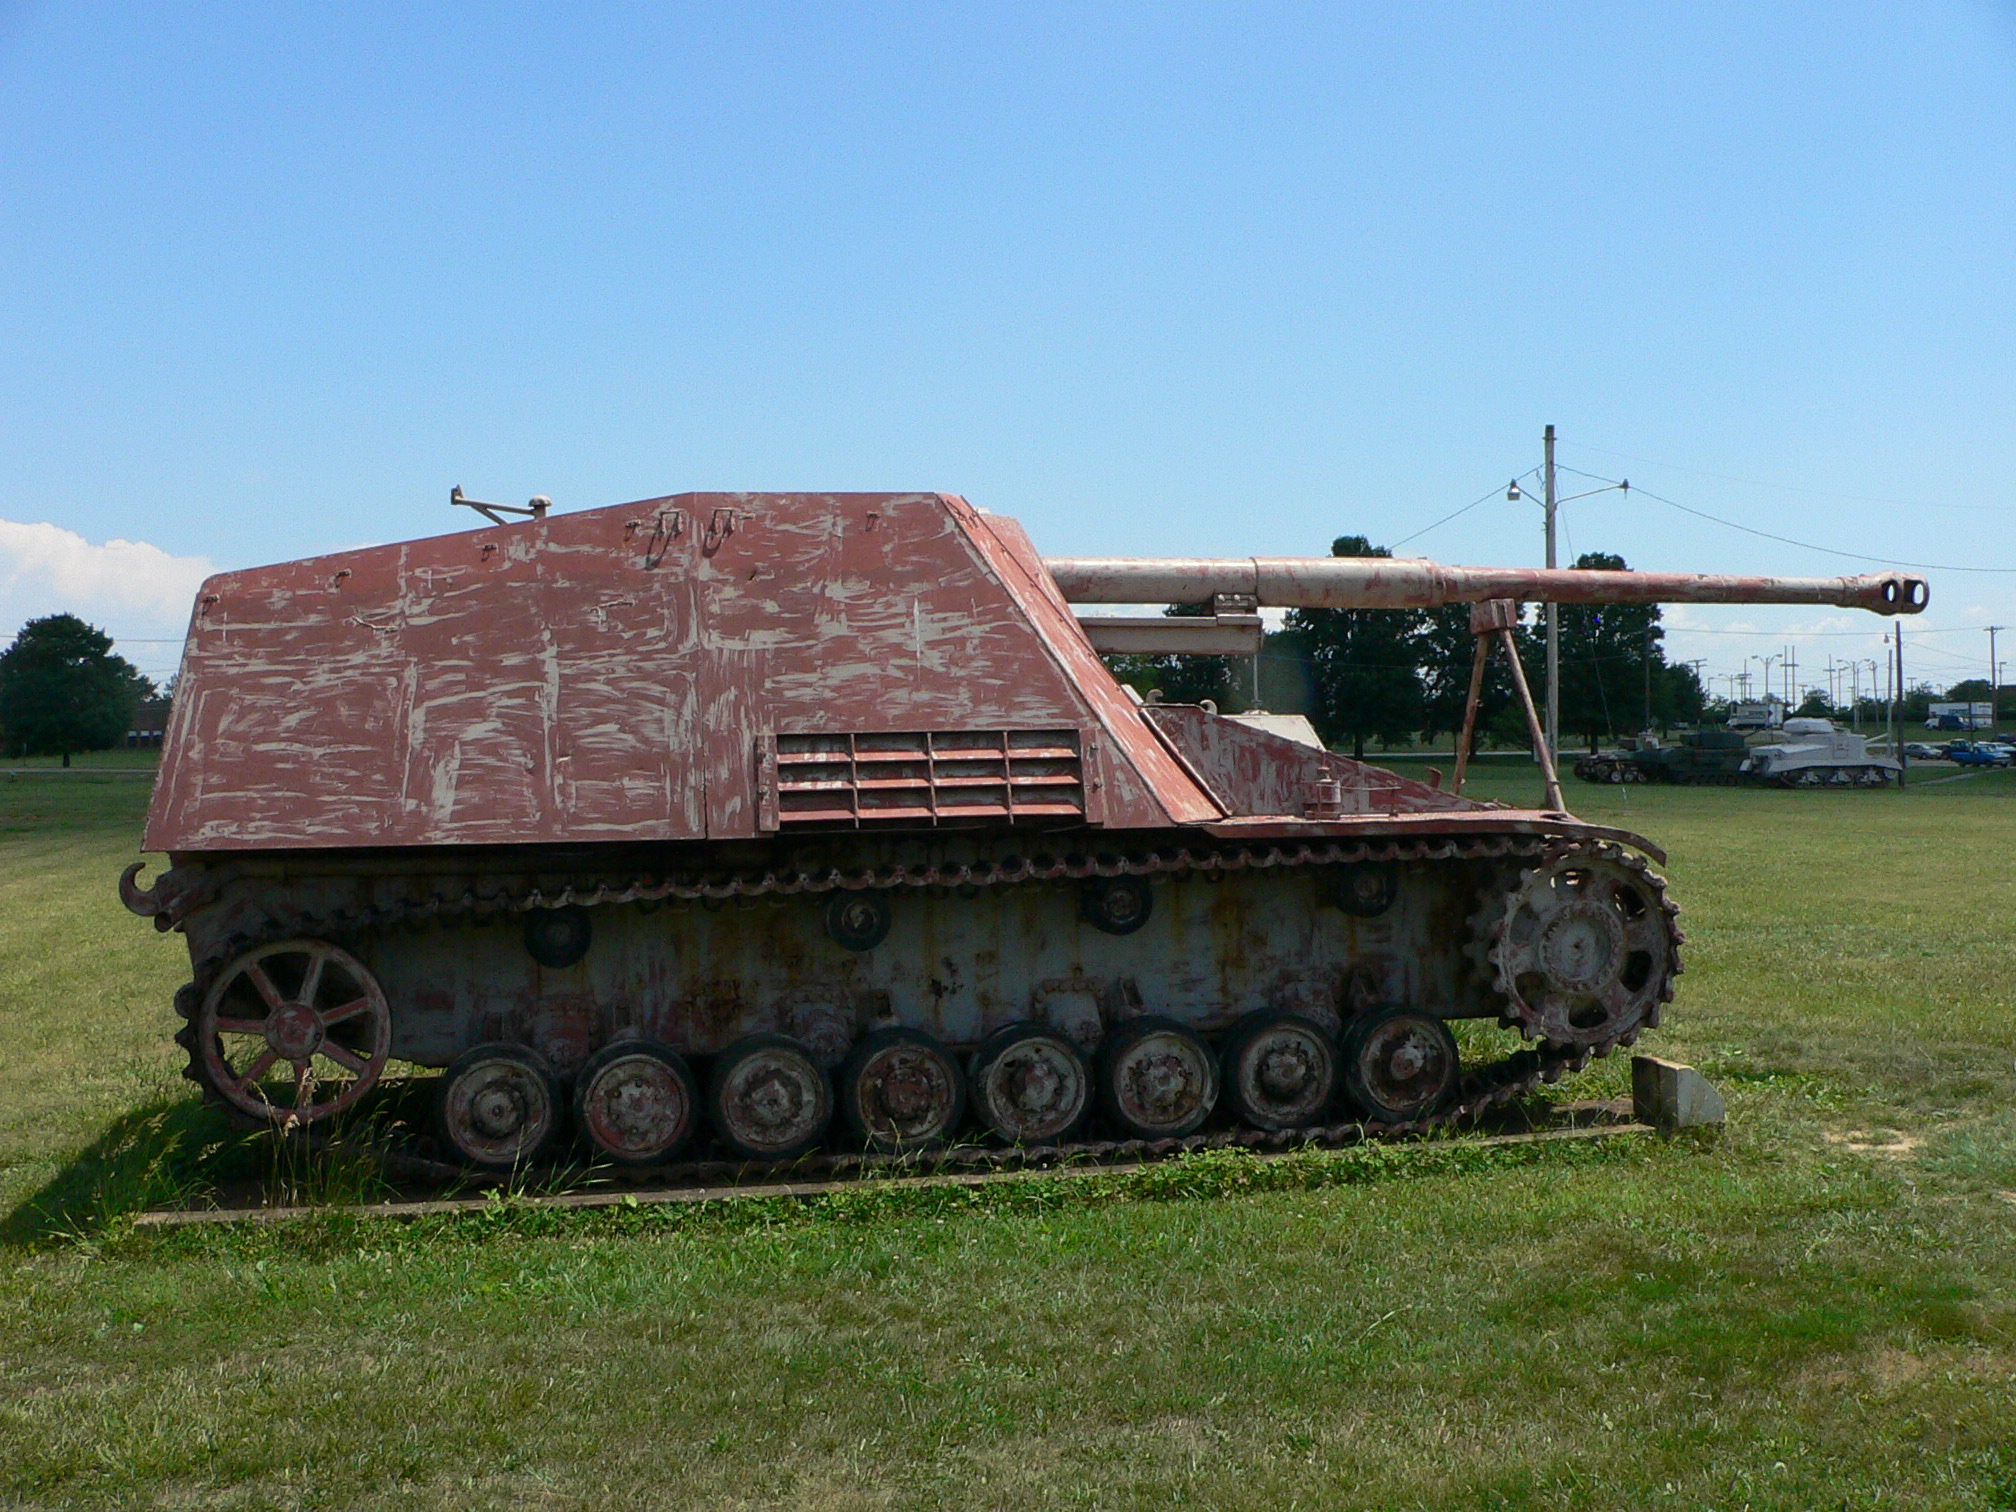 German Hornisse/Nashorn tank destroyer on display at the United States Army Ordnance Museum, Aberdeen Proving Ground, Maryland, United States, 12 Jun 2007